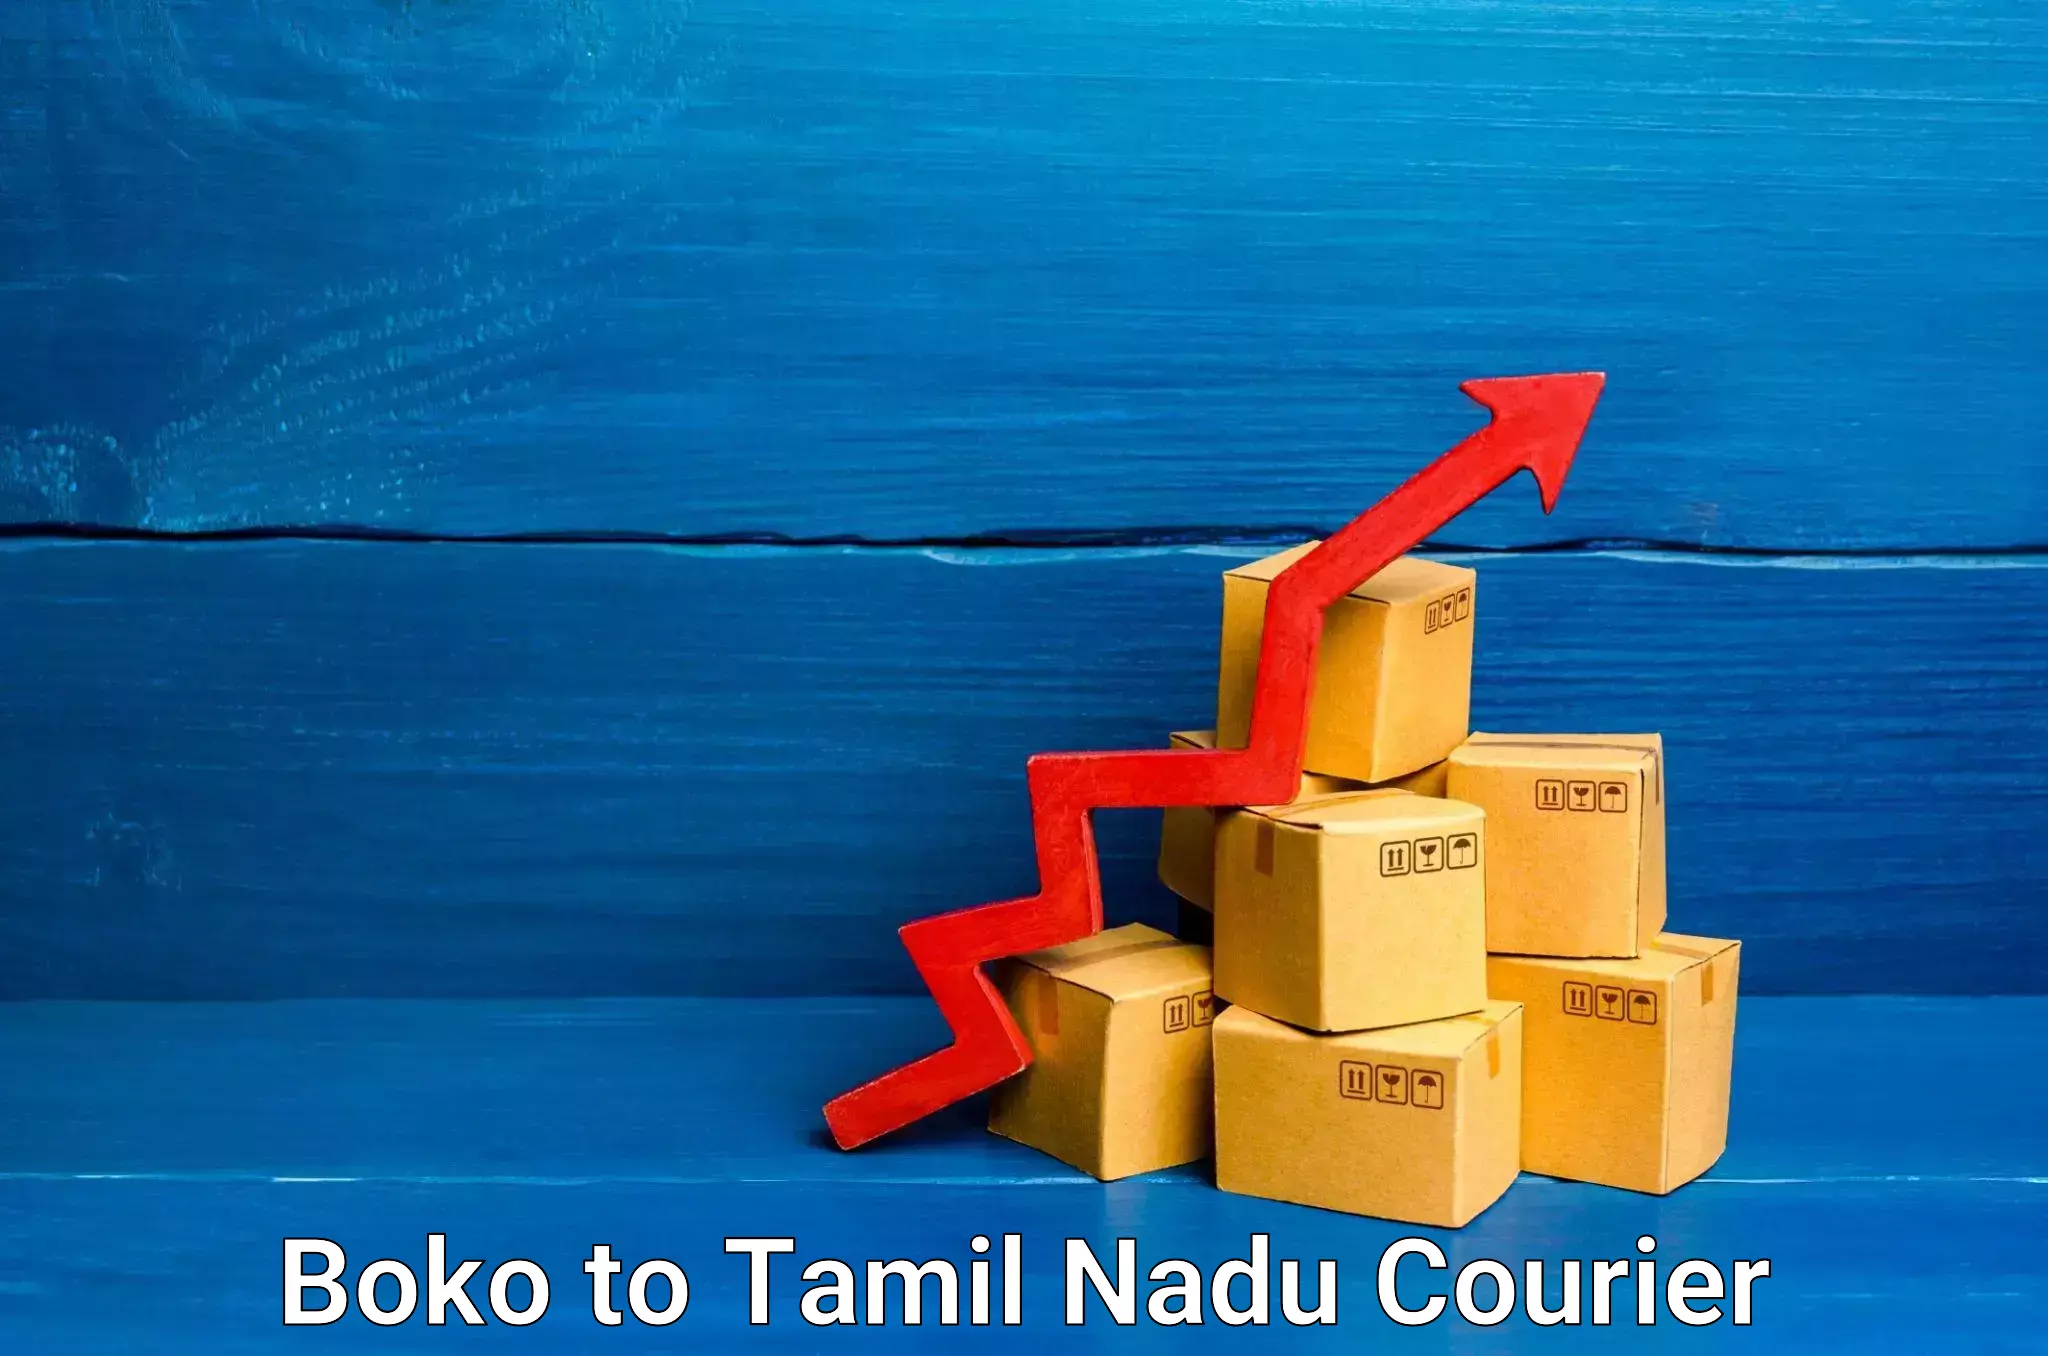 State-of-the-art courier technology Boko to Chennai Port